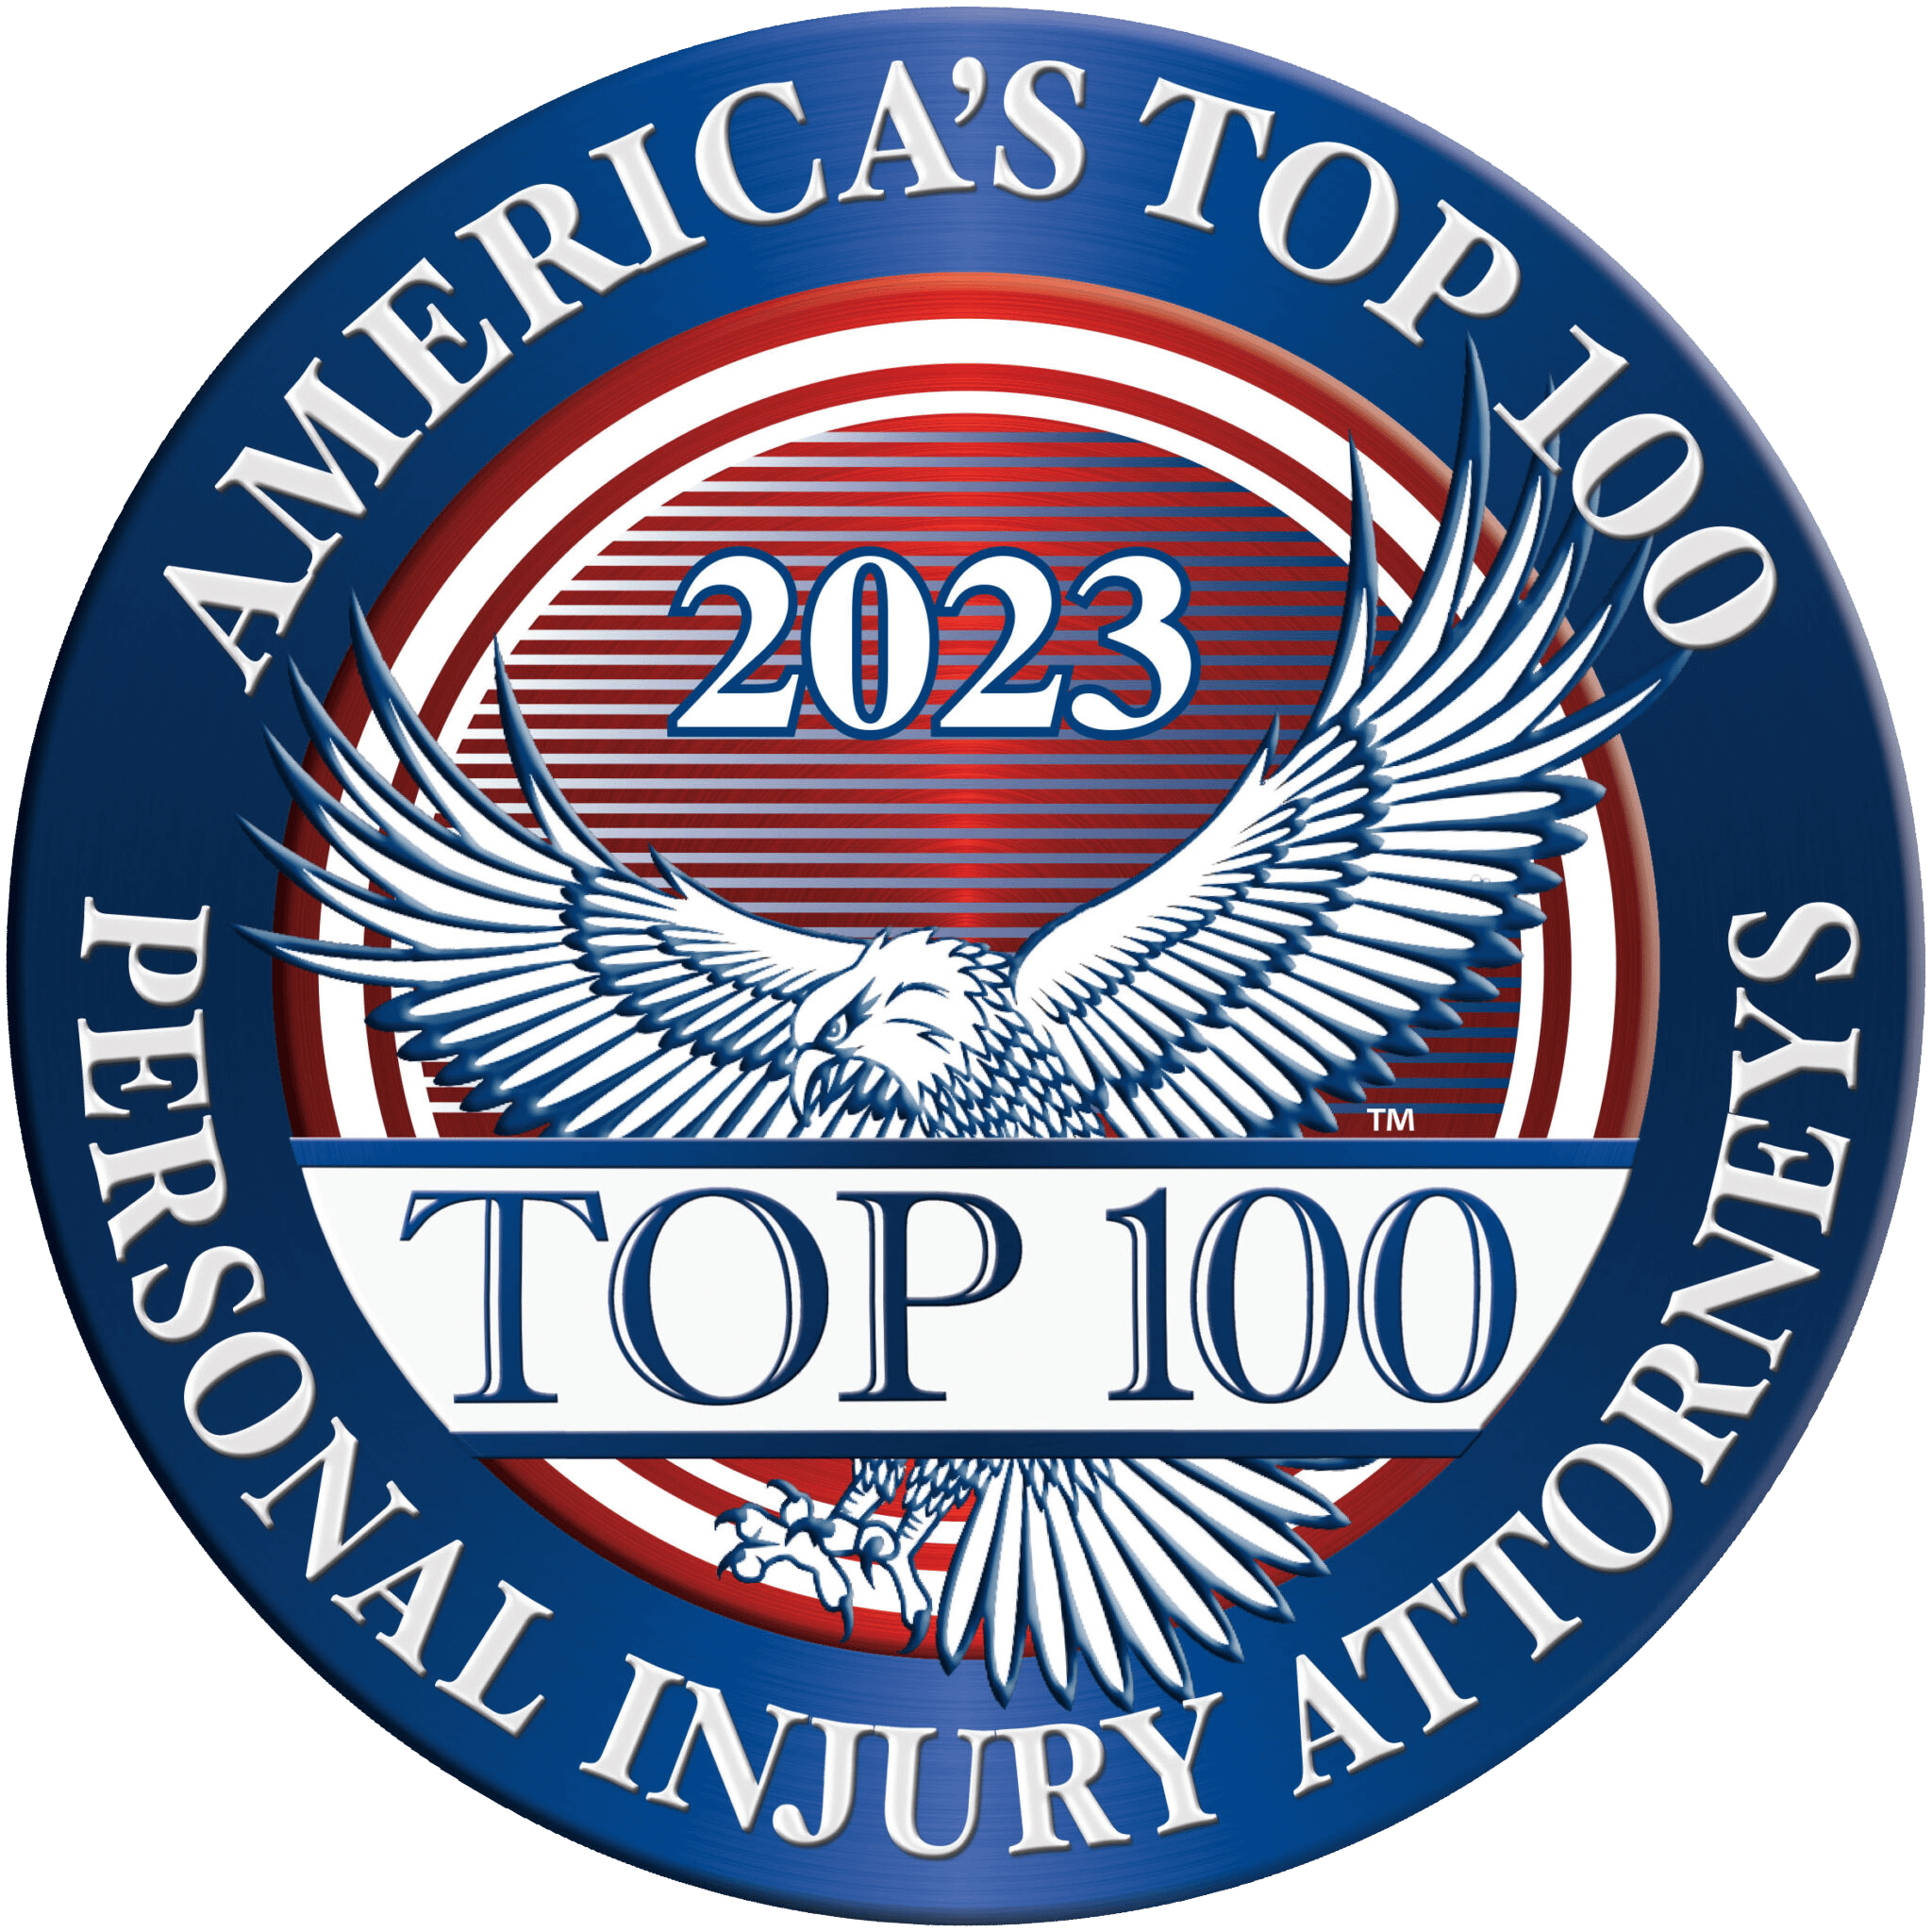 America's top 100 personal injury lawyers 2023 badge